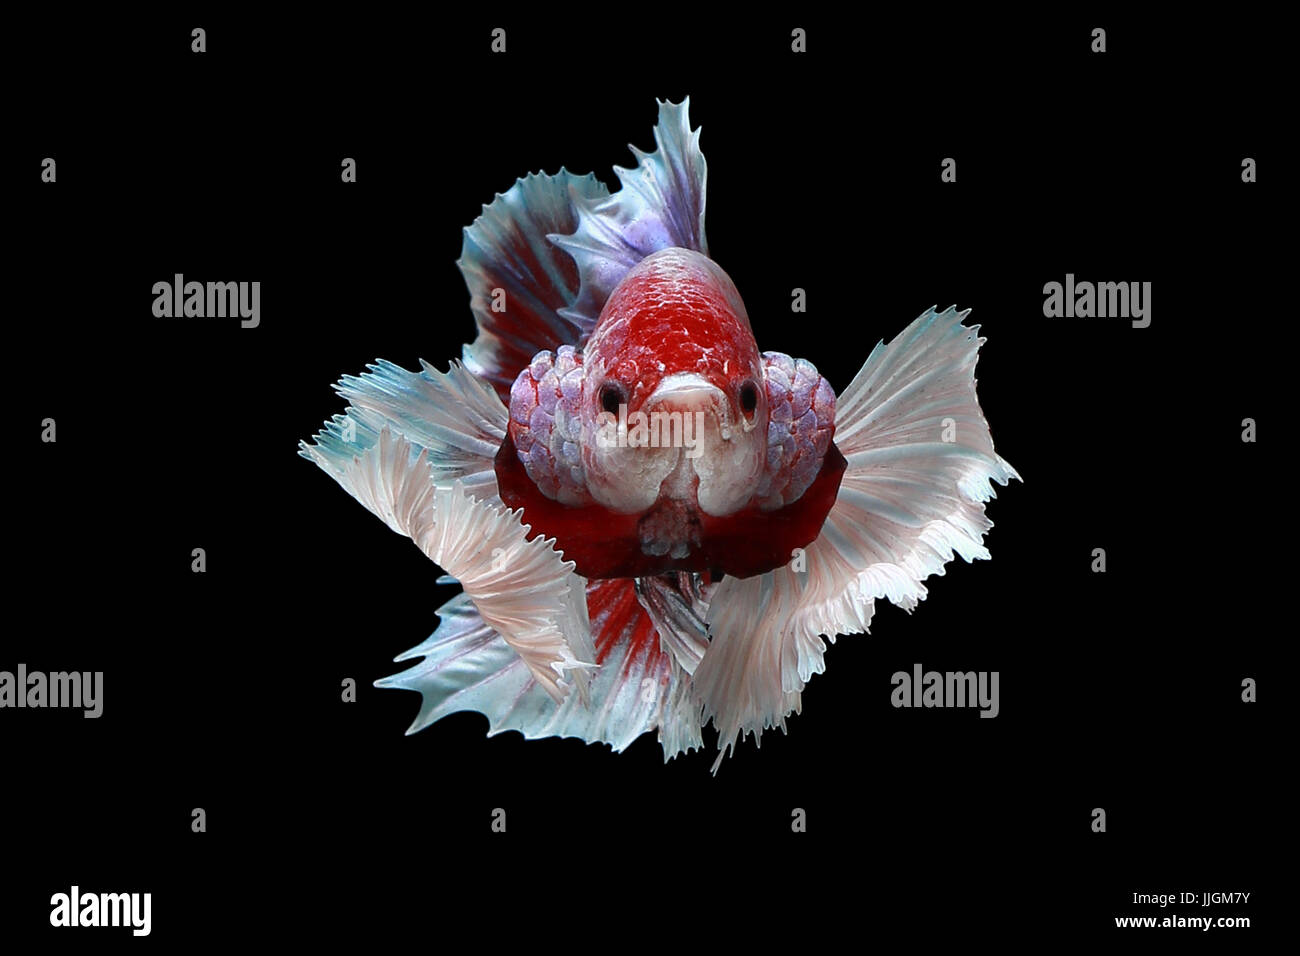 Portrait of a betta fish swimming against a black background Stock Photo